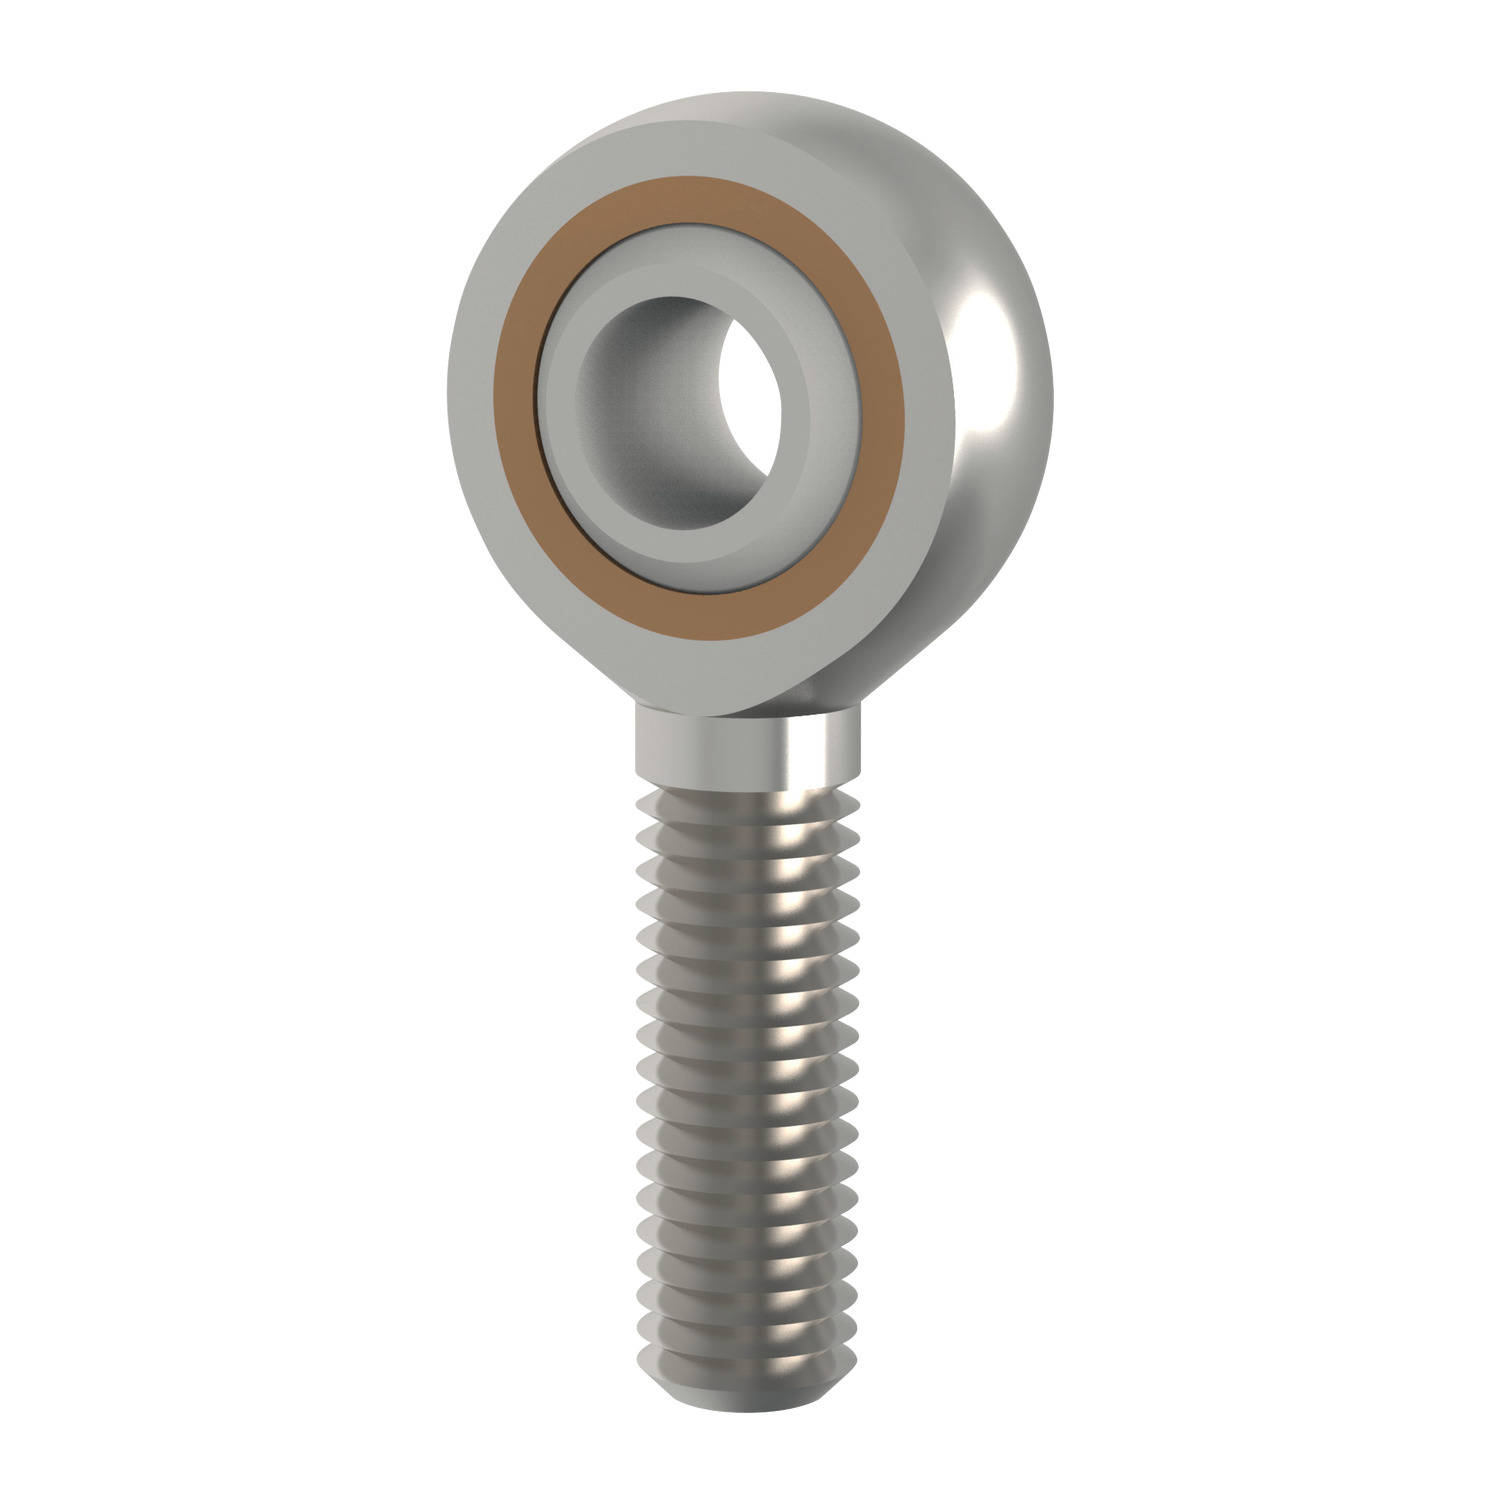 Low Cost Rod End - Male These economy, male thread rod ends are made from low carbon steel which is zinc plated. The bearing of the rod end is a brass bearing ring with a PTFE composite lining.